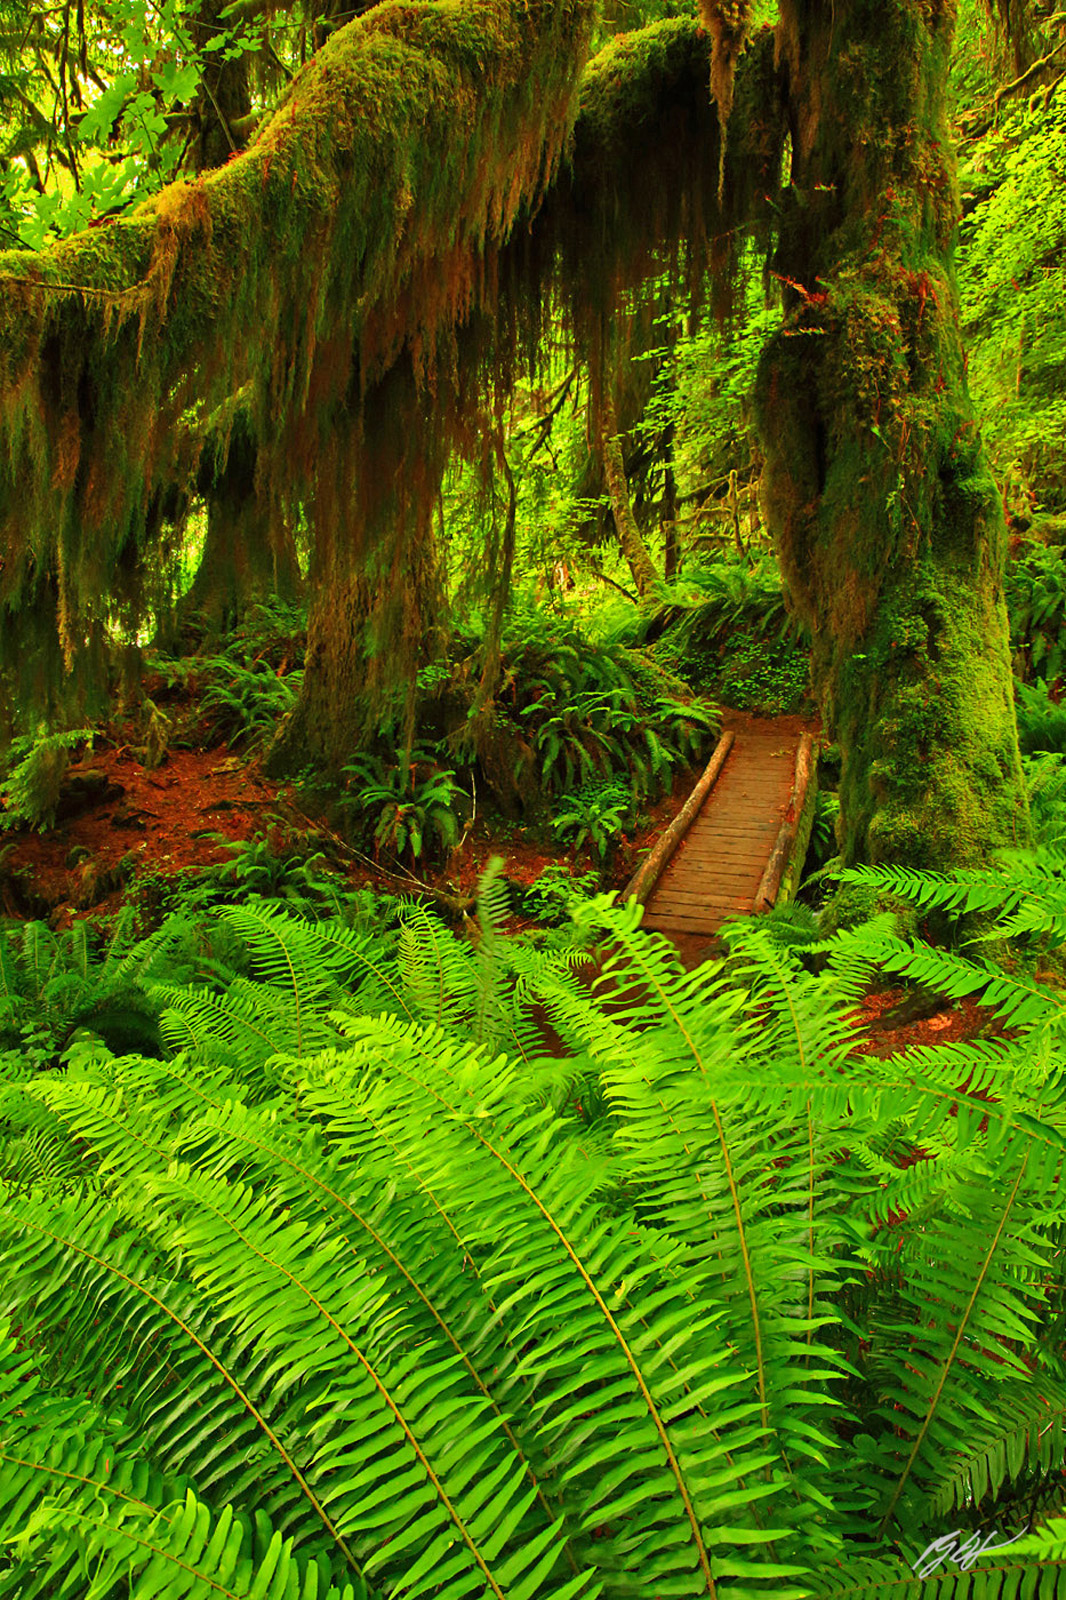 Hoh River Trail in Olympic National Park in Washington